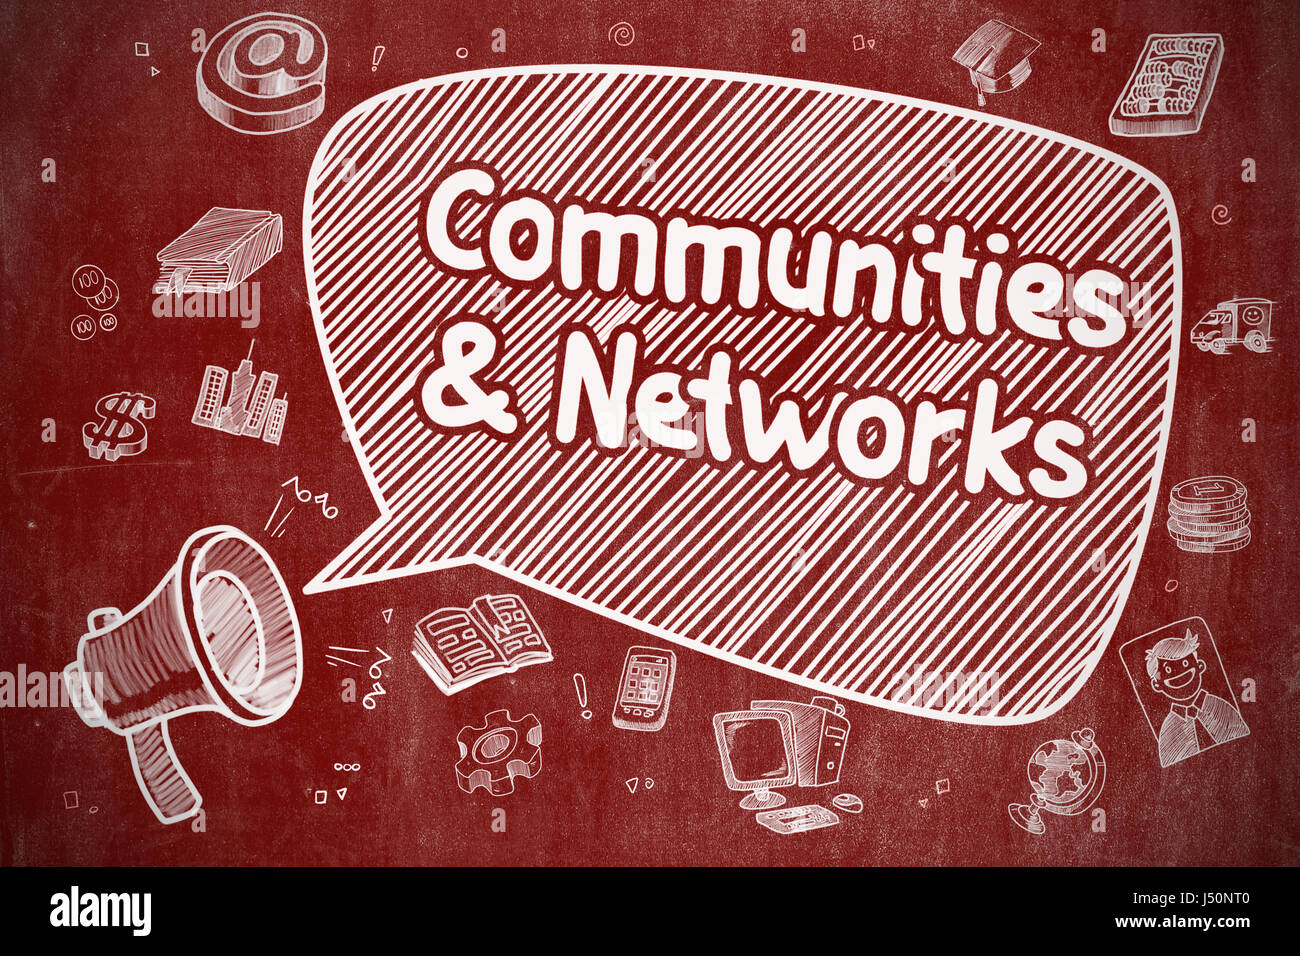 Communities And Networks - Business Concept. Stock Photo